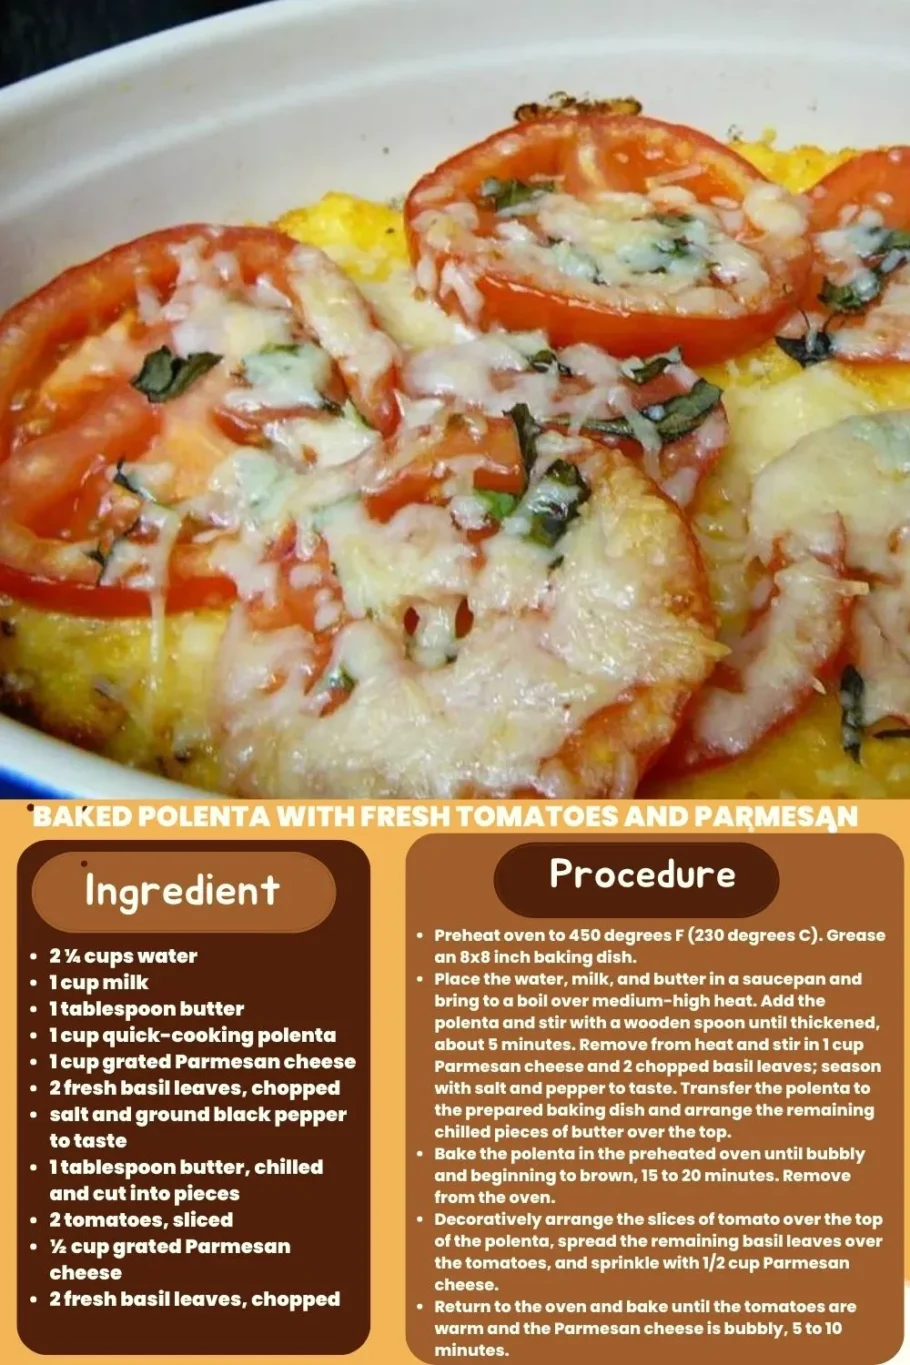 ingredients and instructions to make Cheesy Baked Polenta in Tomato Sauce